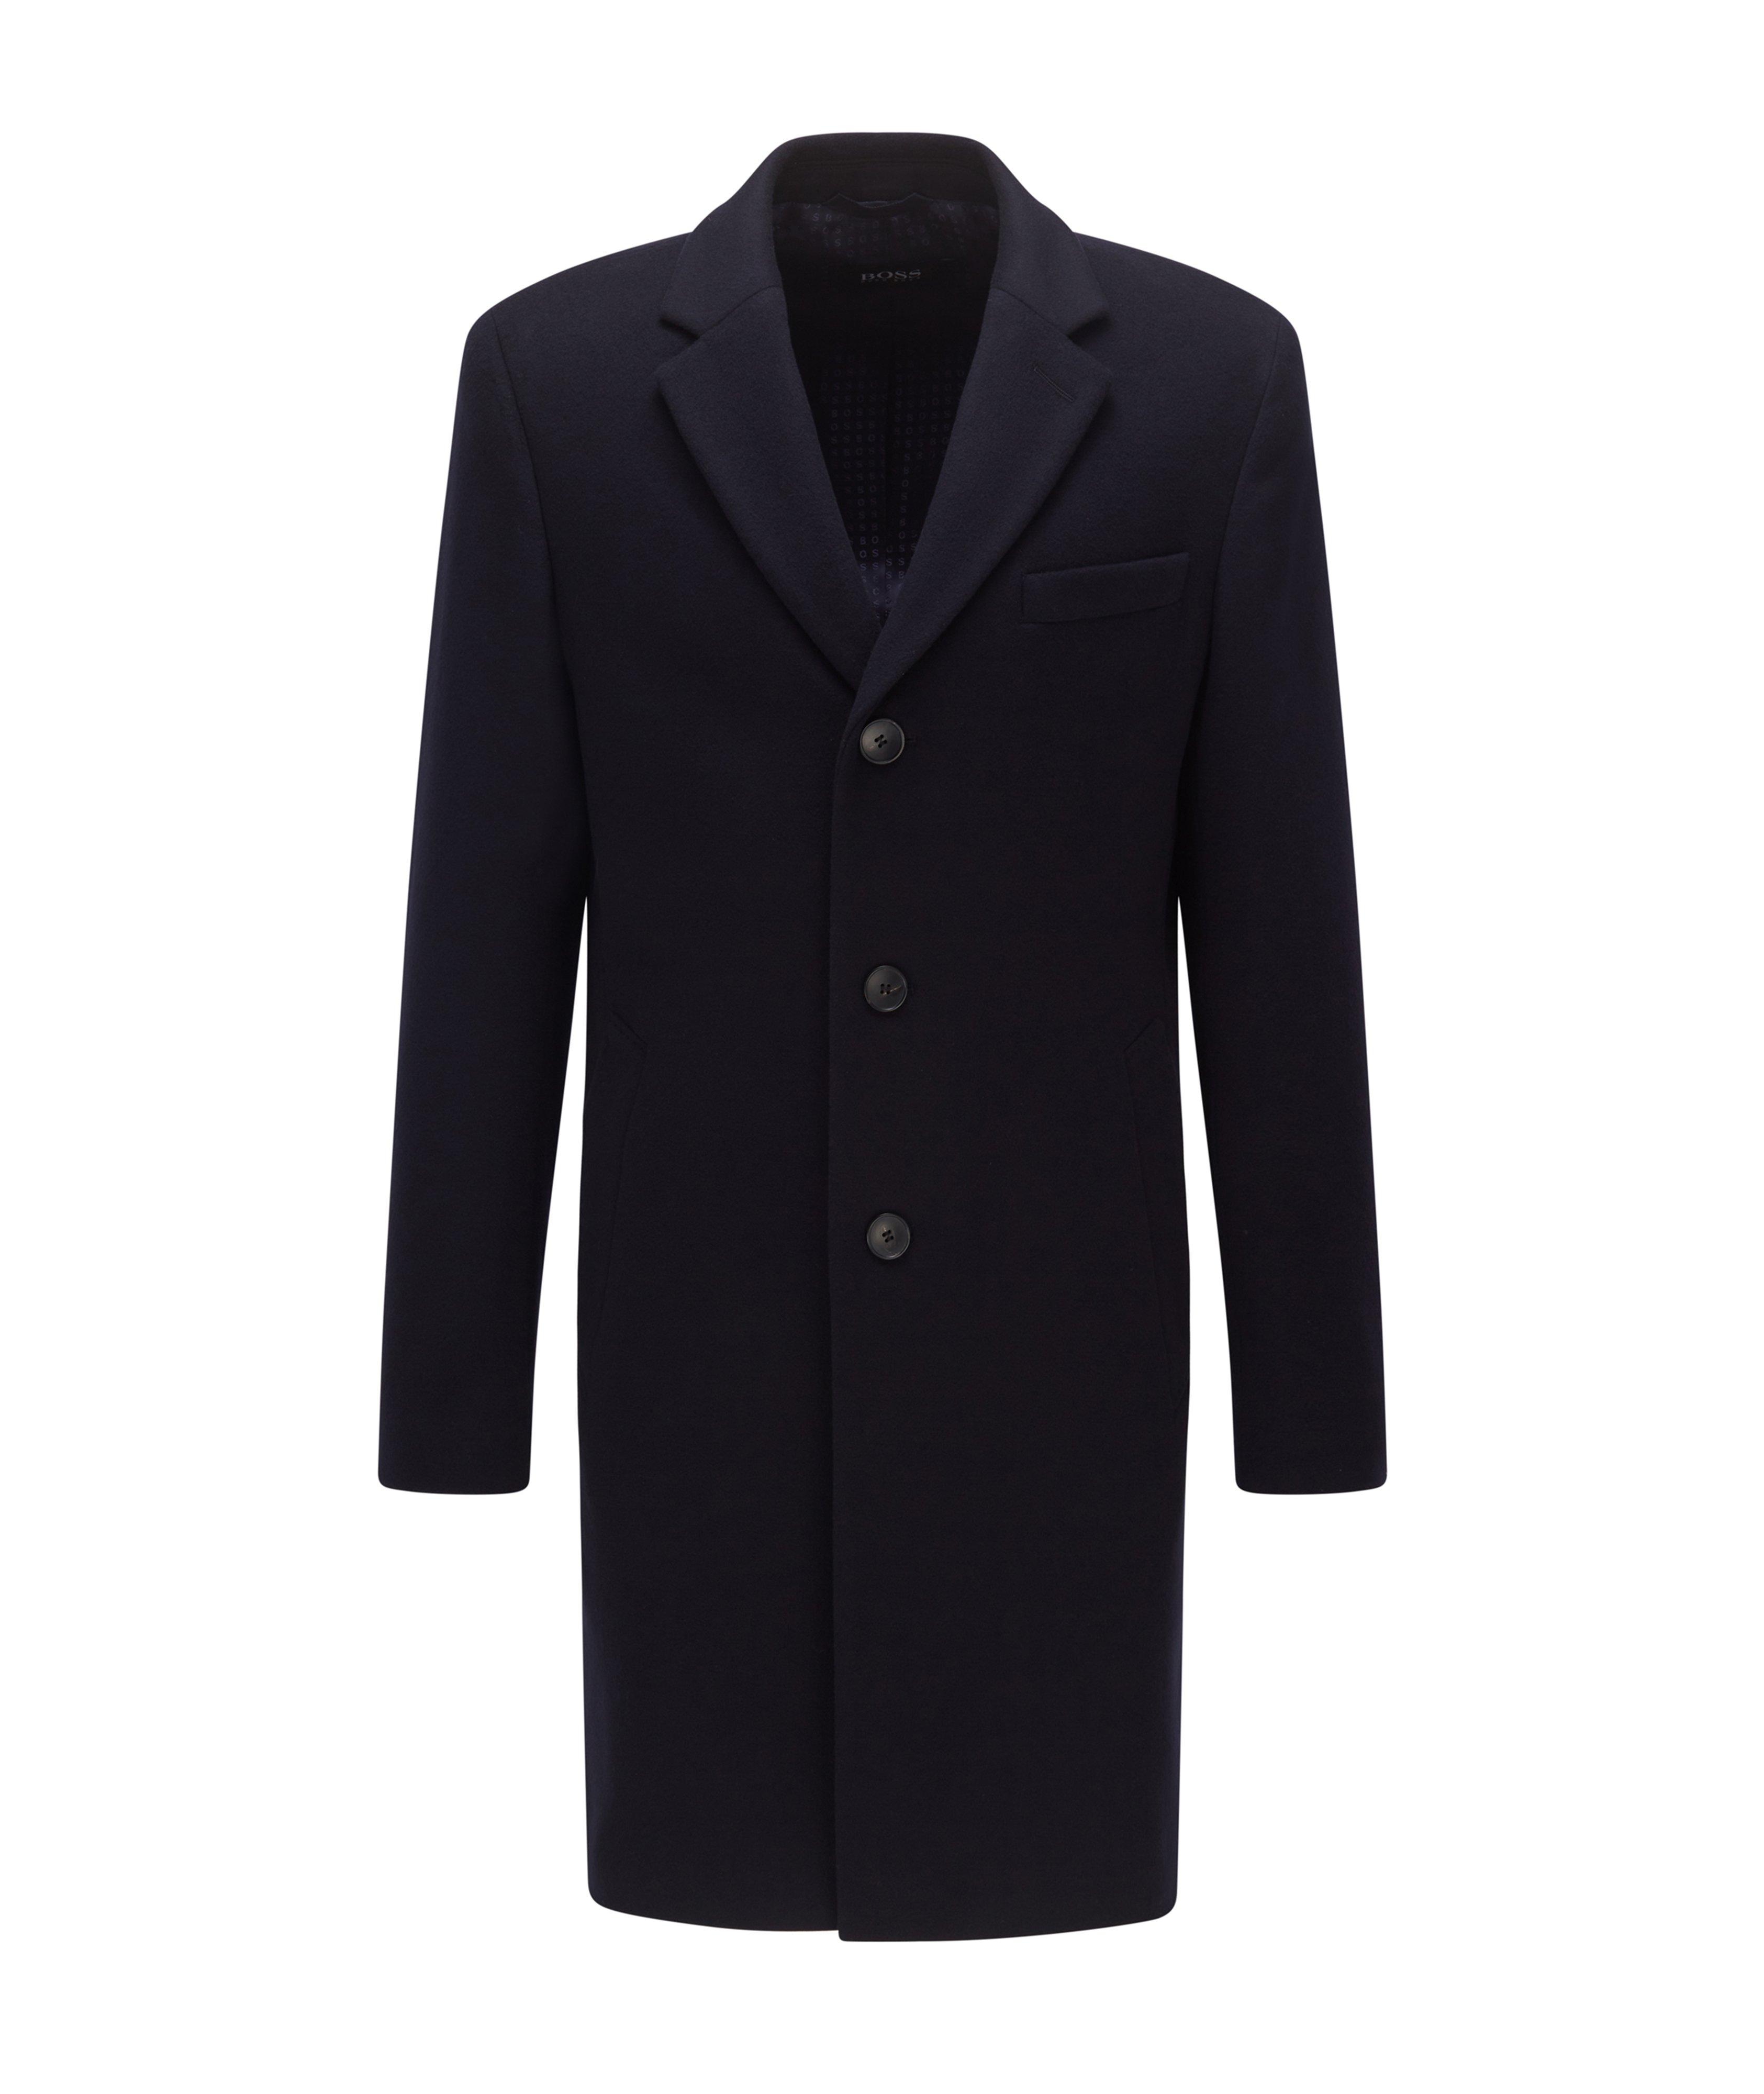 Hyde Wool-Cashmere Topcoat image 0